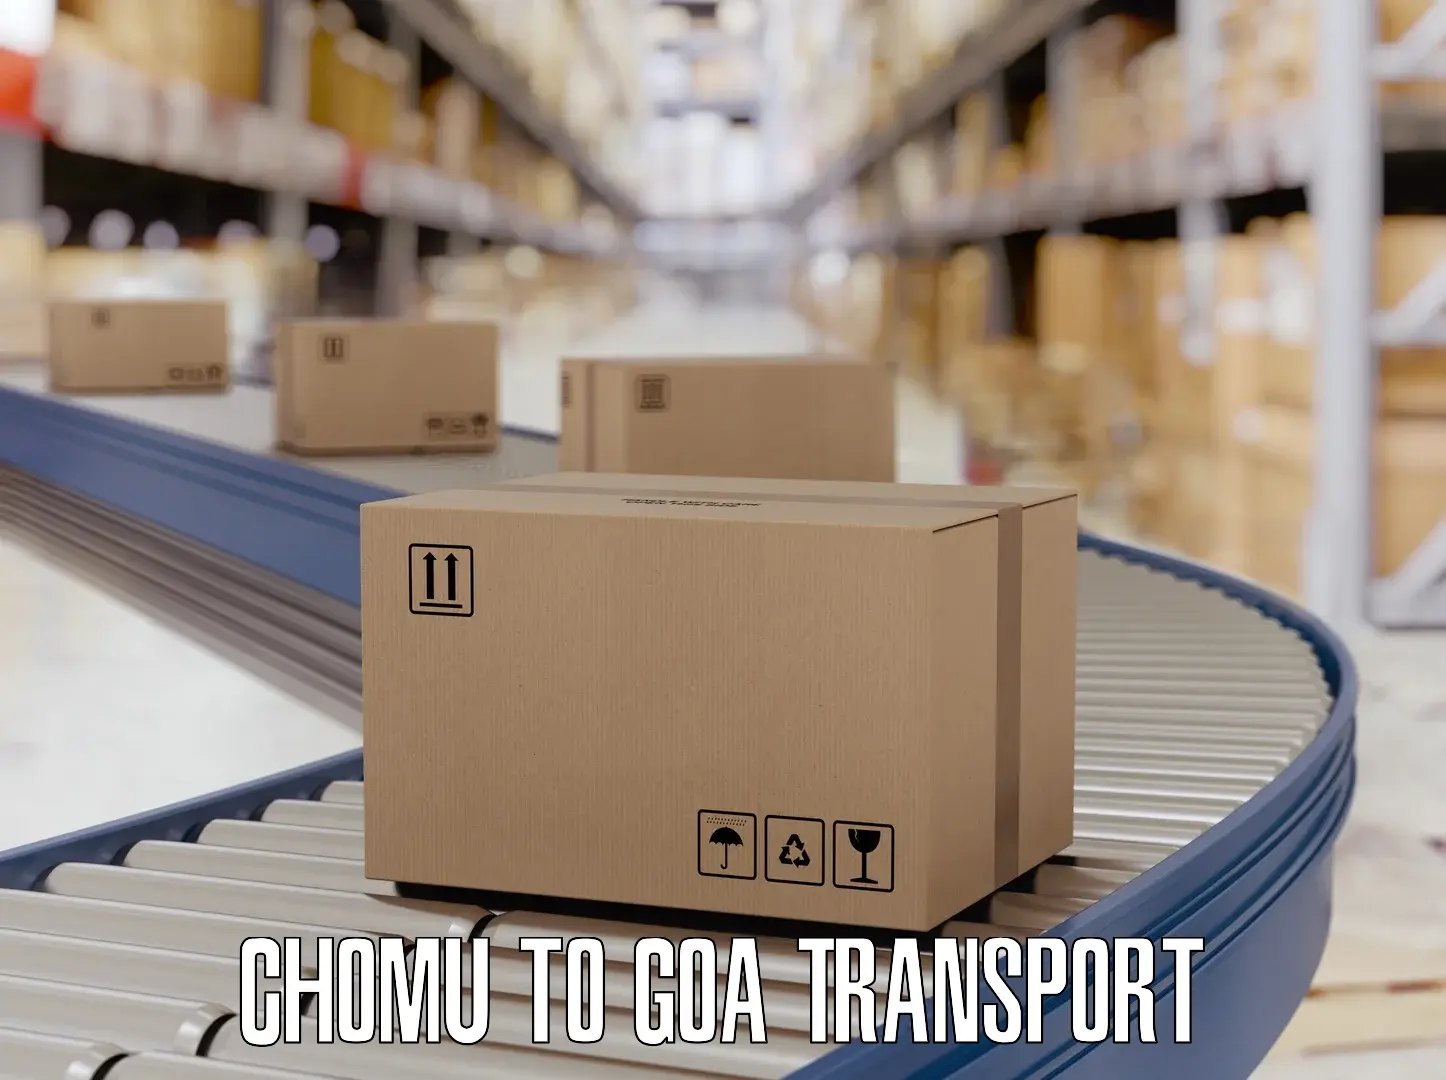 Online transport booking Chomu to Goa